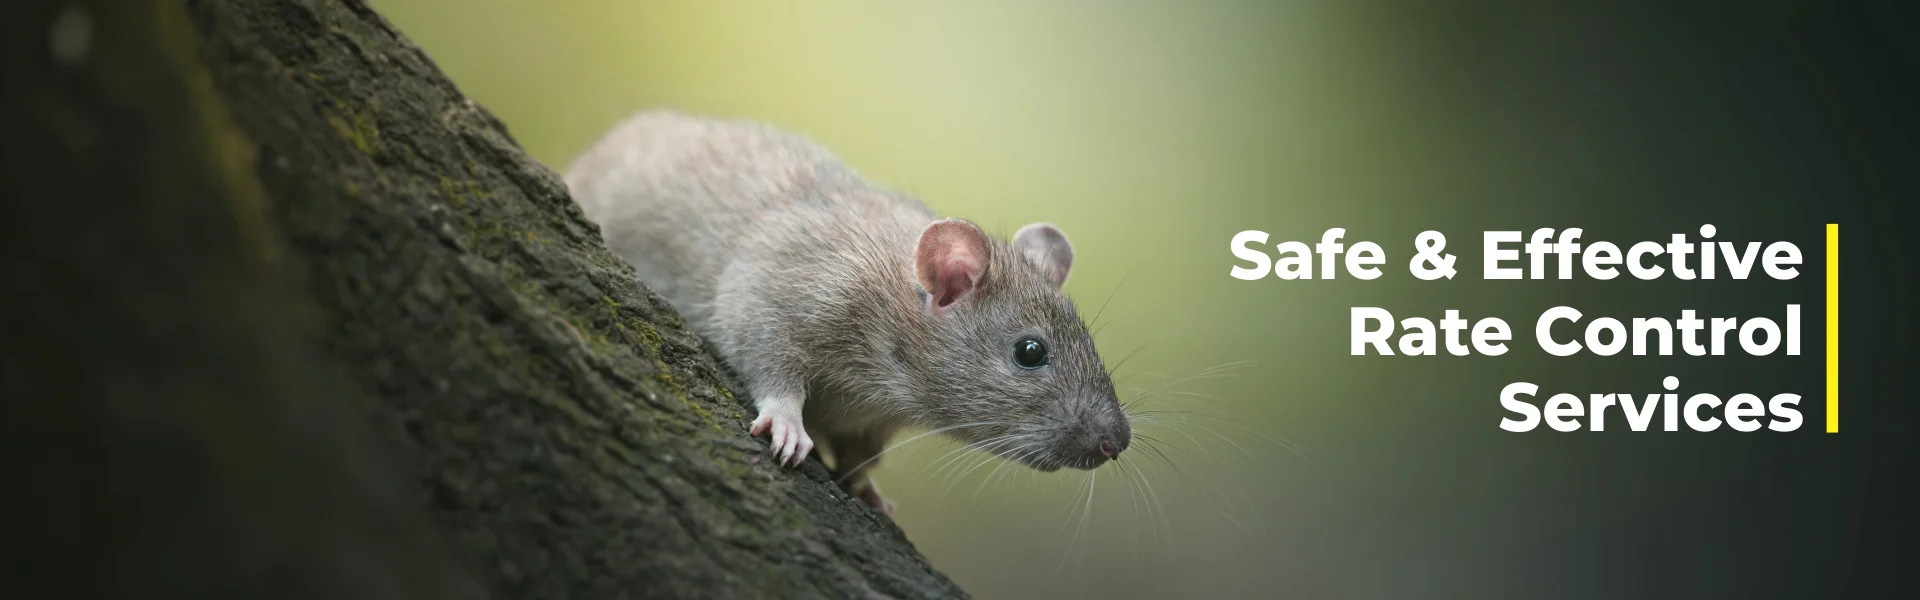 Rat control services in Chennai